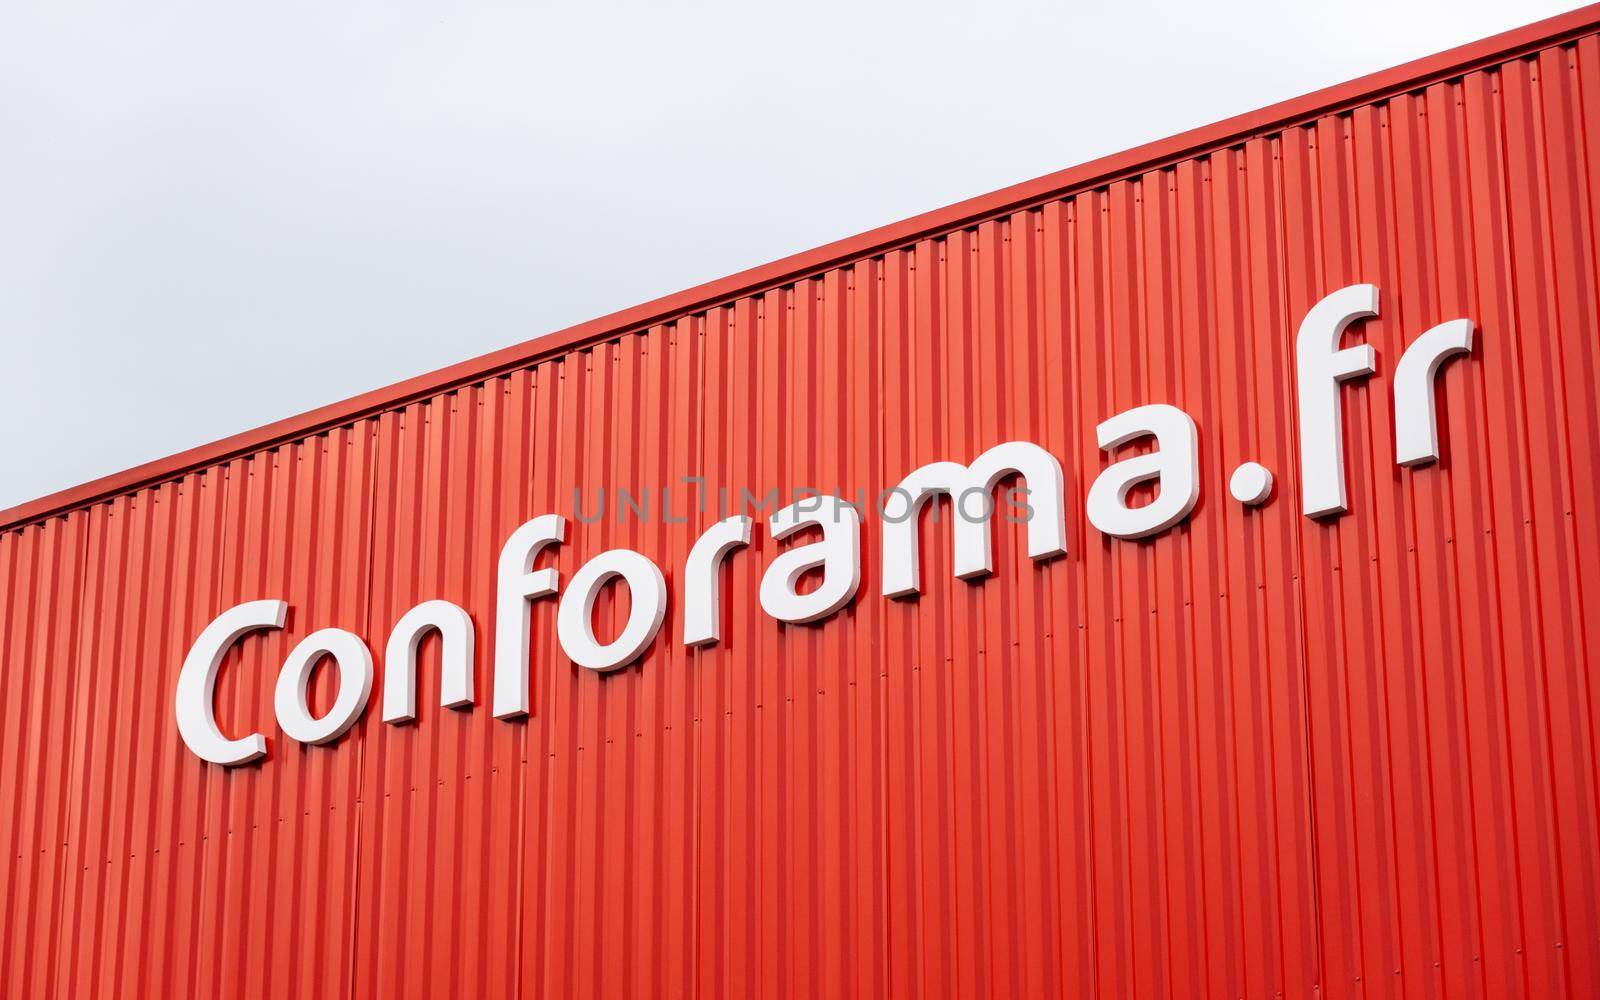 Conforama sign on red store facade, in Anglet, France by dutourdumonde